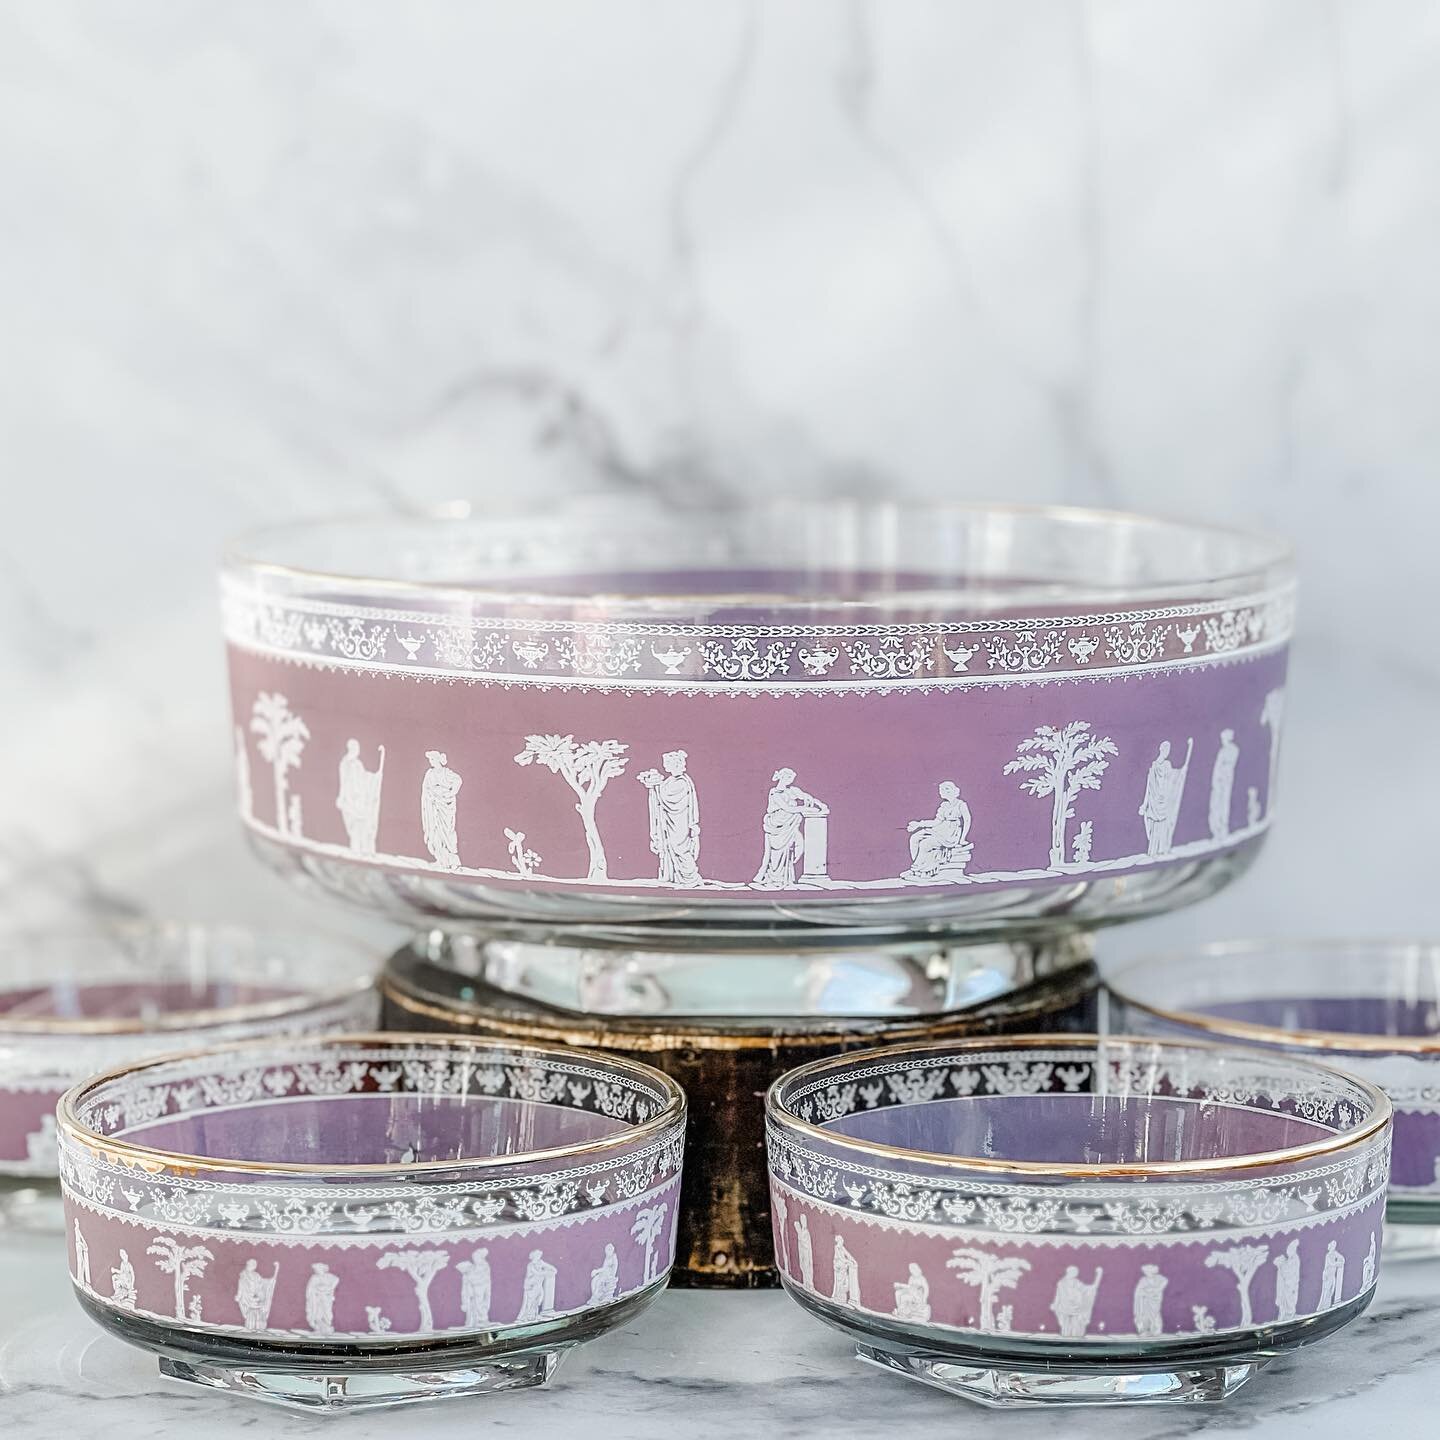 ✨Available in stories✨ 

Story sale live now! 

1950s &ldquo;Hellenic Lilac&rdquo; Set available for custom orders✨ Free local pick-up in Charleston or shipping available with delivery by 🎄🎁